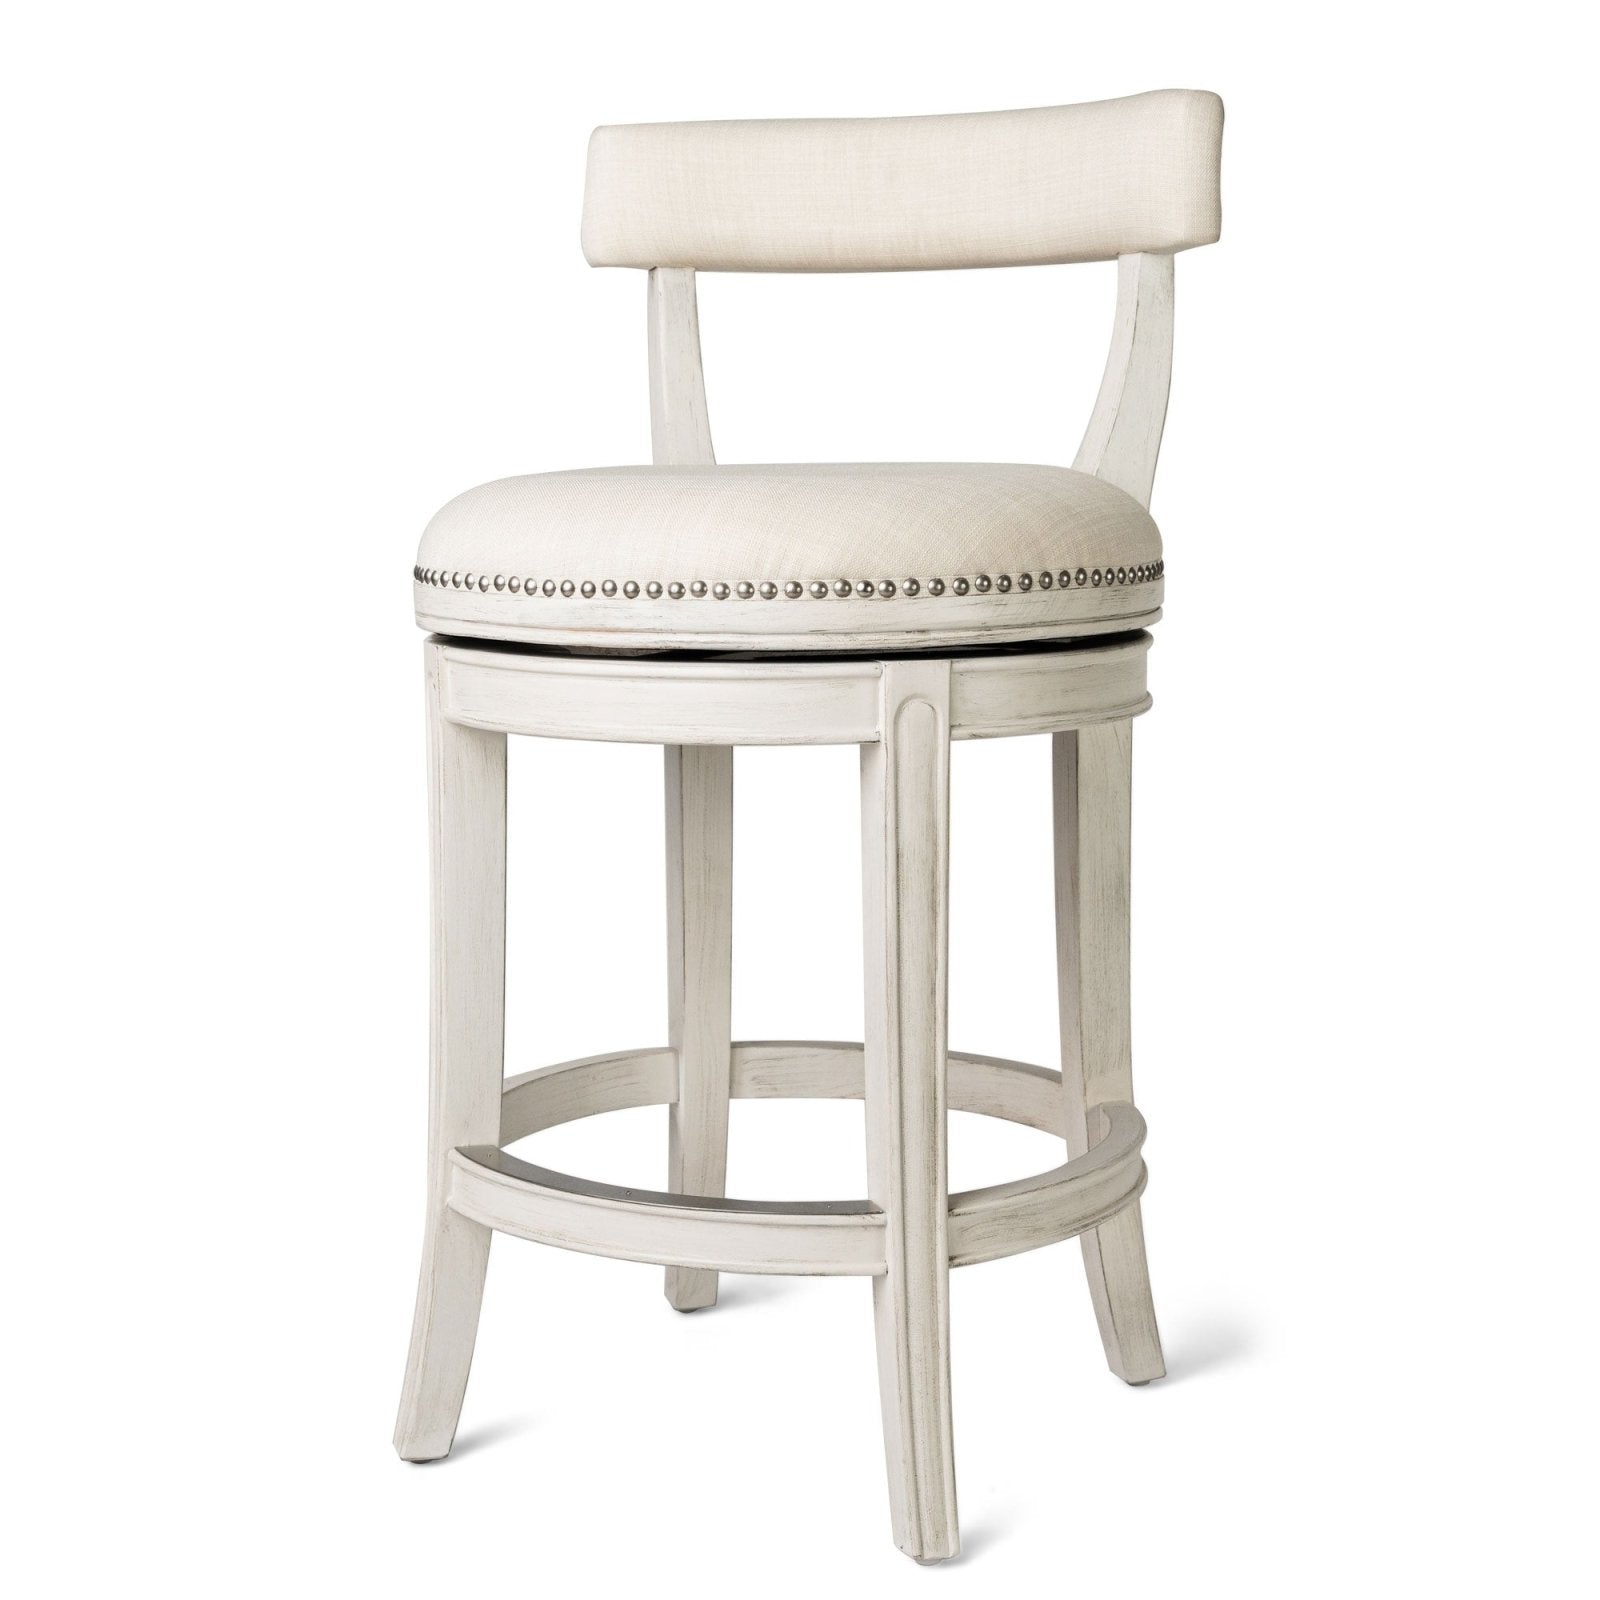 Alexander Counter Stool in White Oak Finish with Natural Color Fabric Upholstery in Stools by Maven Lane